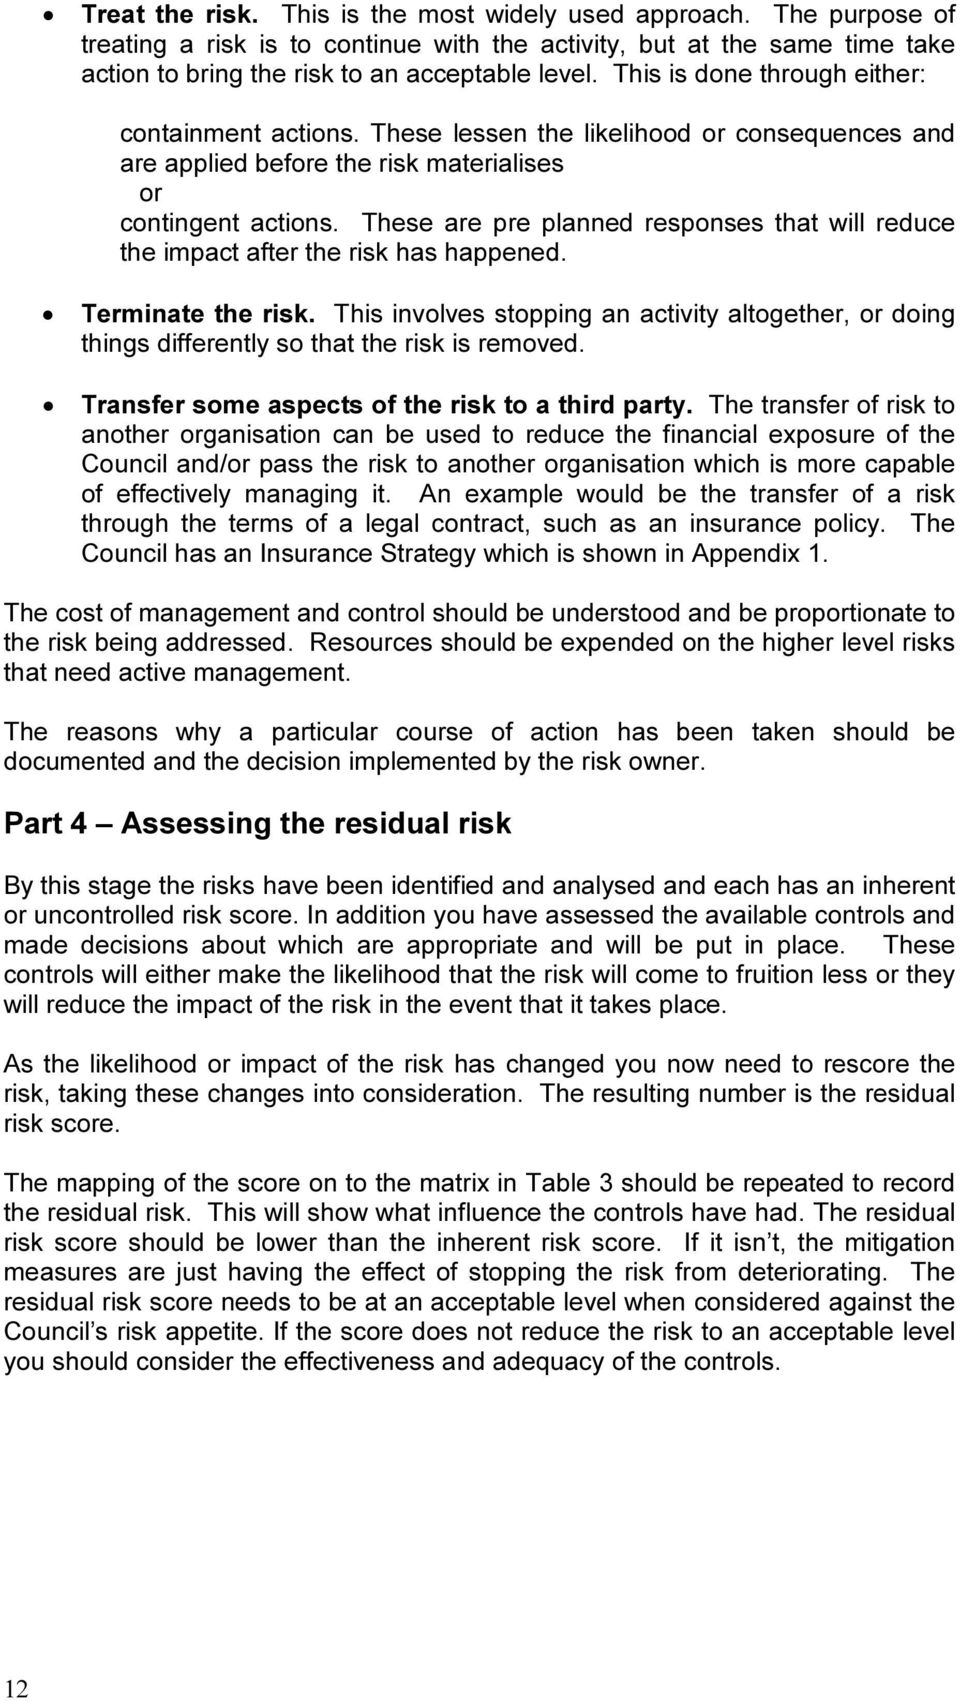 These are pre planned responses that will reduce the impact after the risk has happened. Terminate the risk.